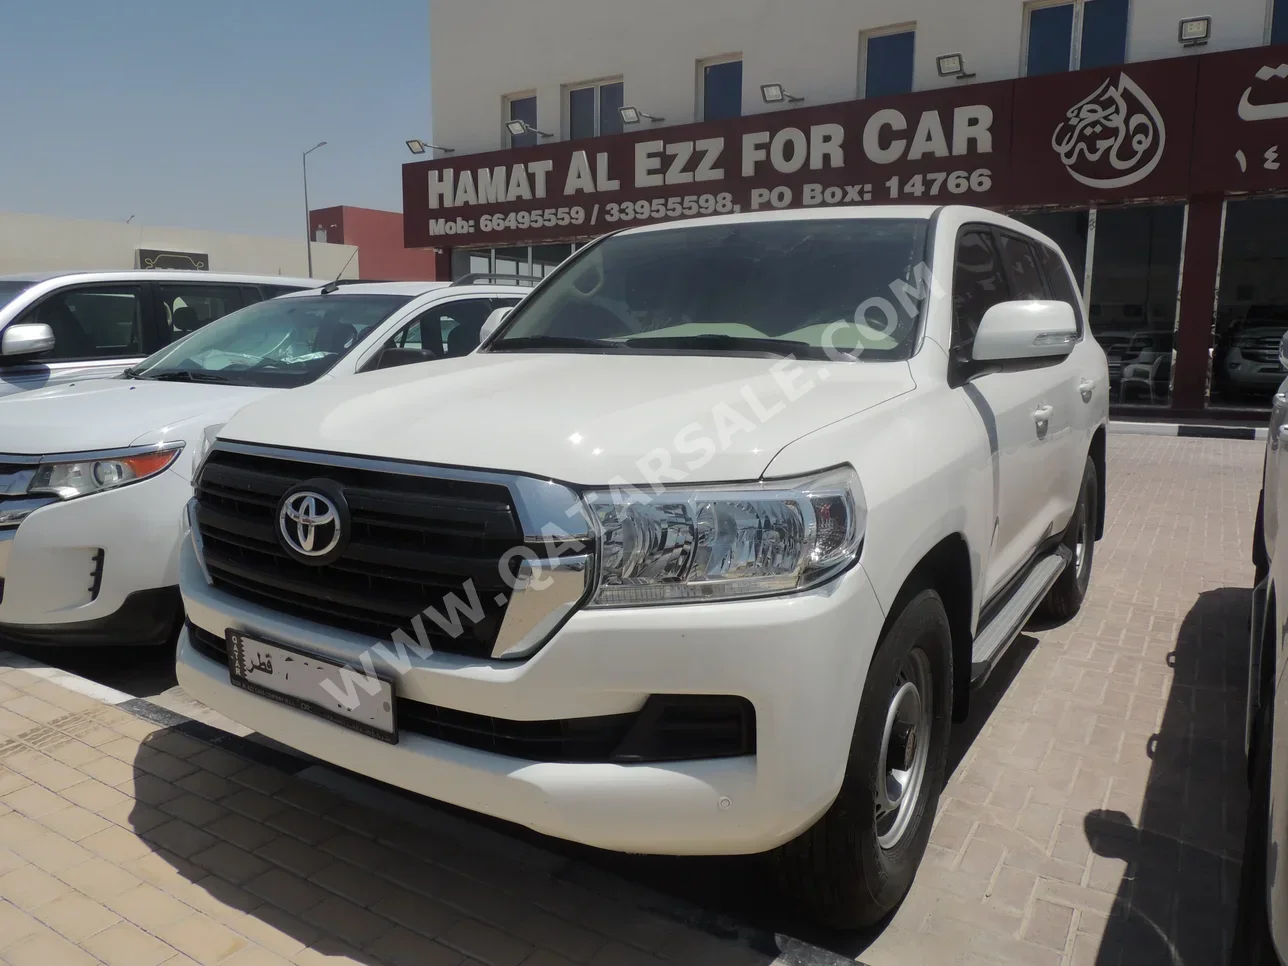 Toyota  Land Cruiser  G  2021  Automatic  158,800 Km  6 Cylinder  Four Wheel Drive (4WD)  SUV  White